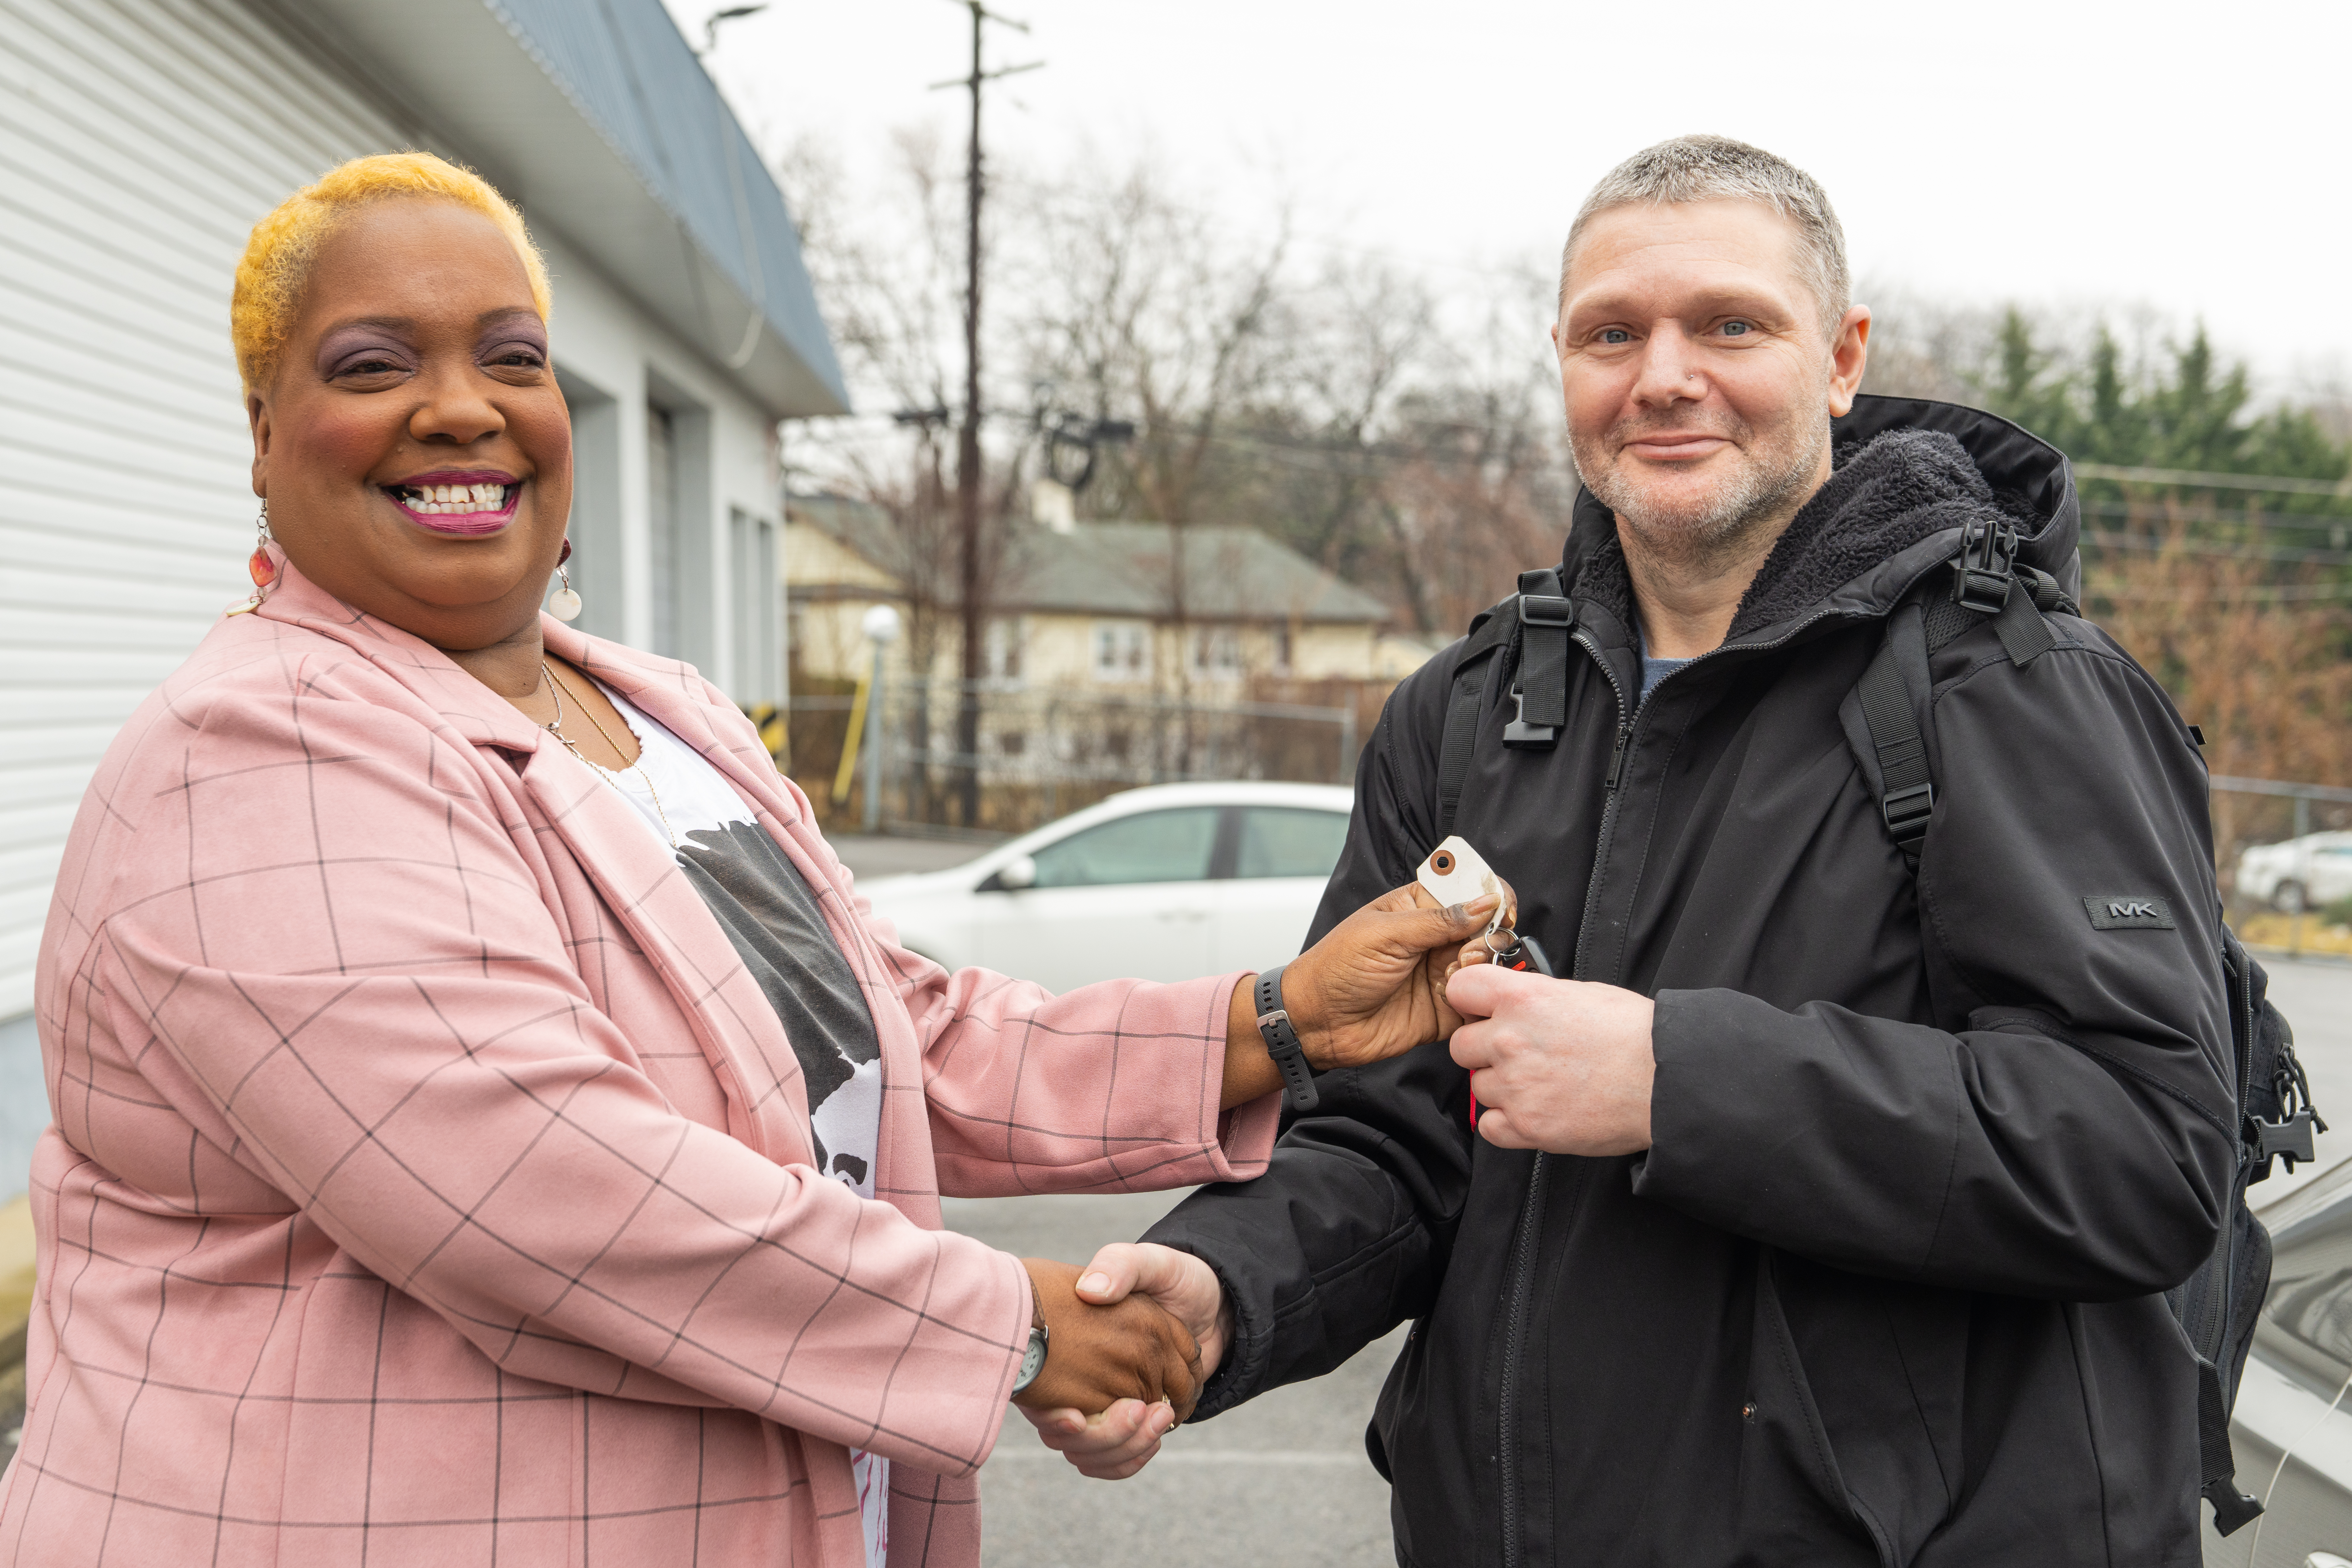 A woman hands a man car keys and shakes his hand